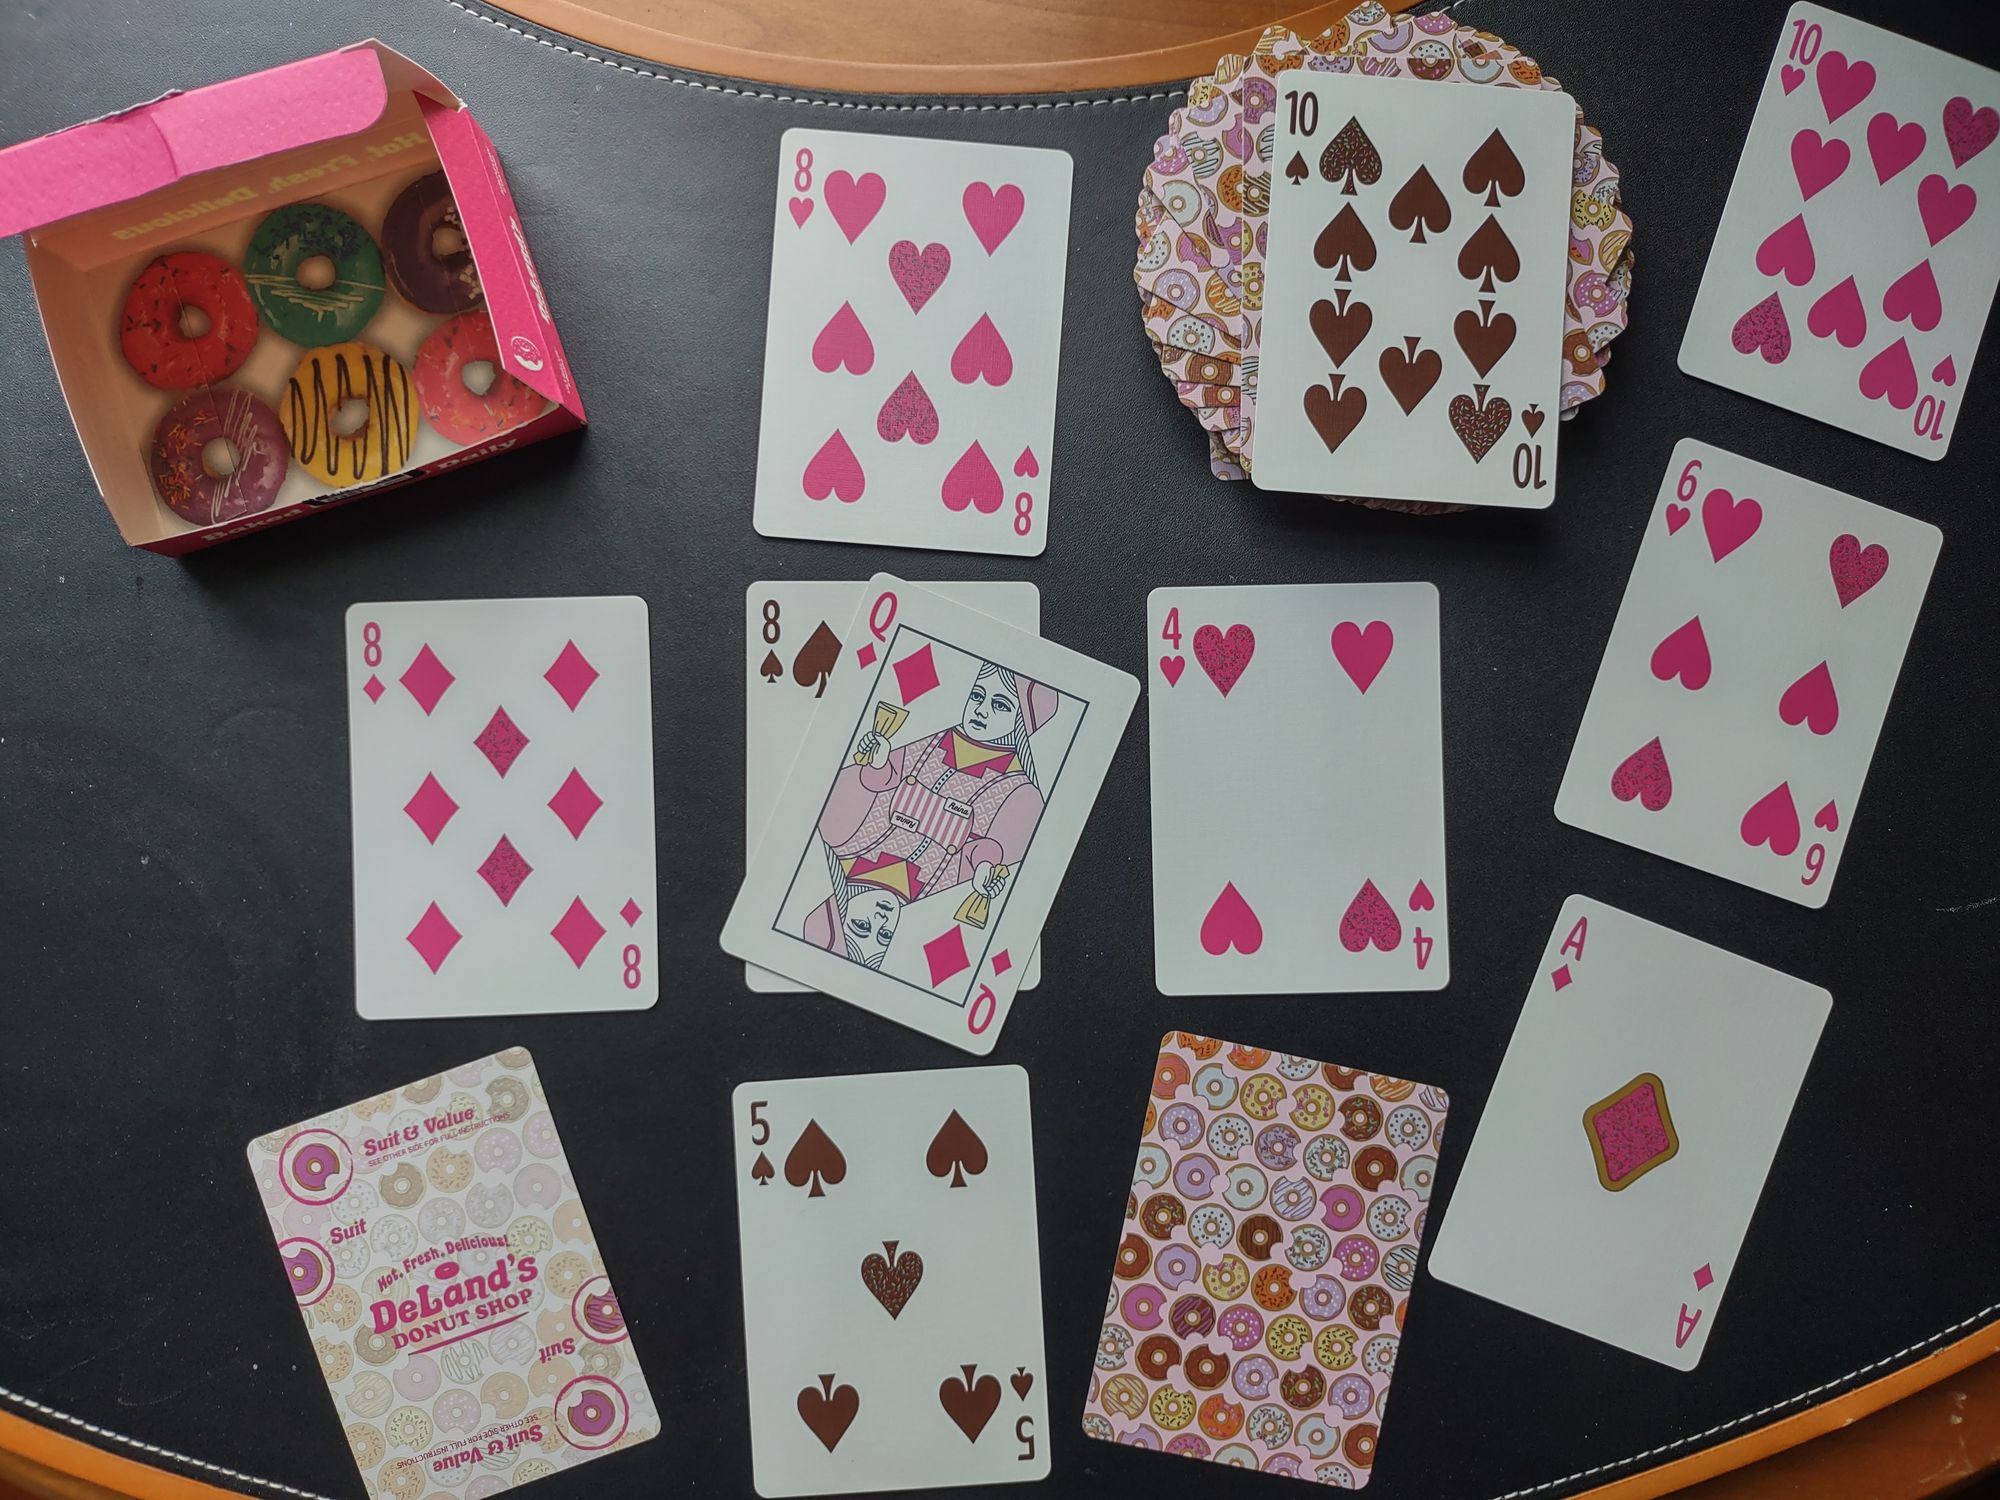 10 of spades. From the Deland's Donut Shop deck by Penguin Cards.